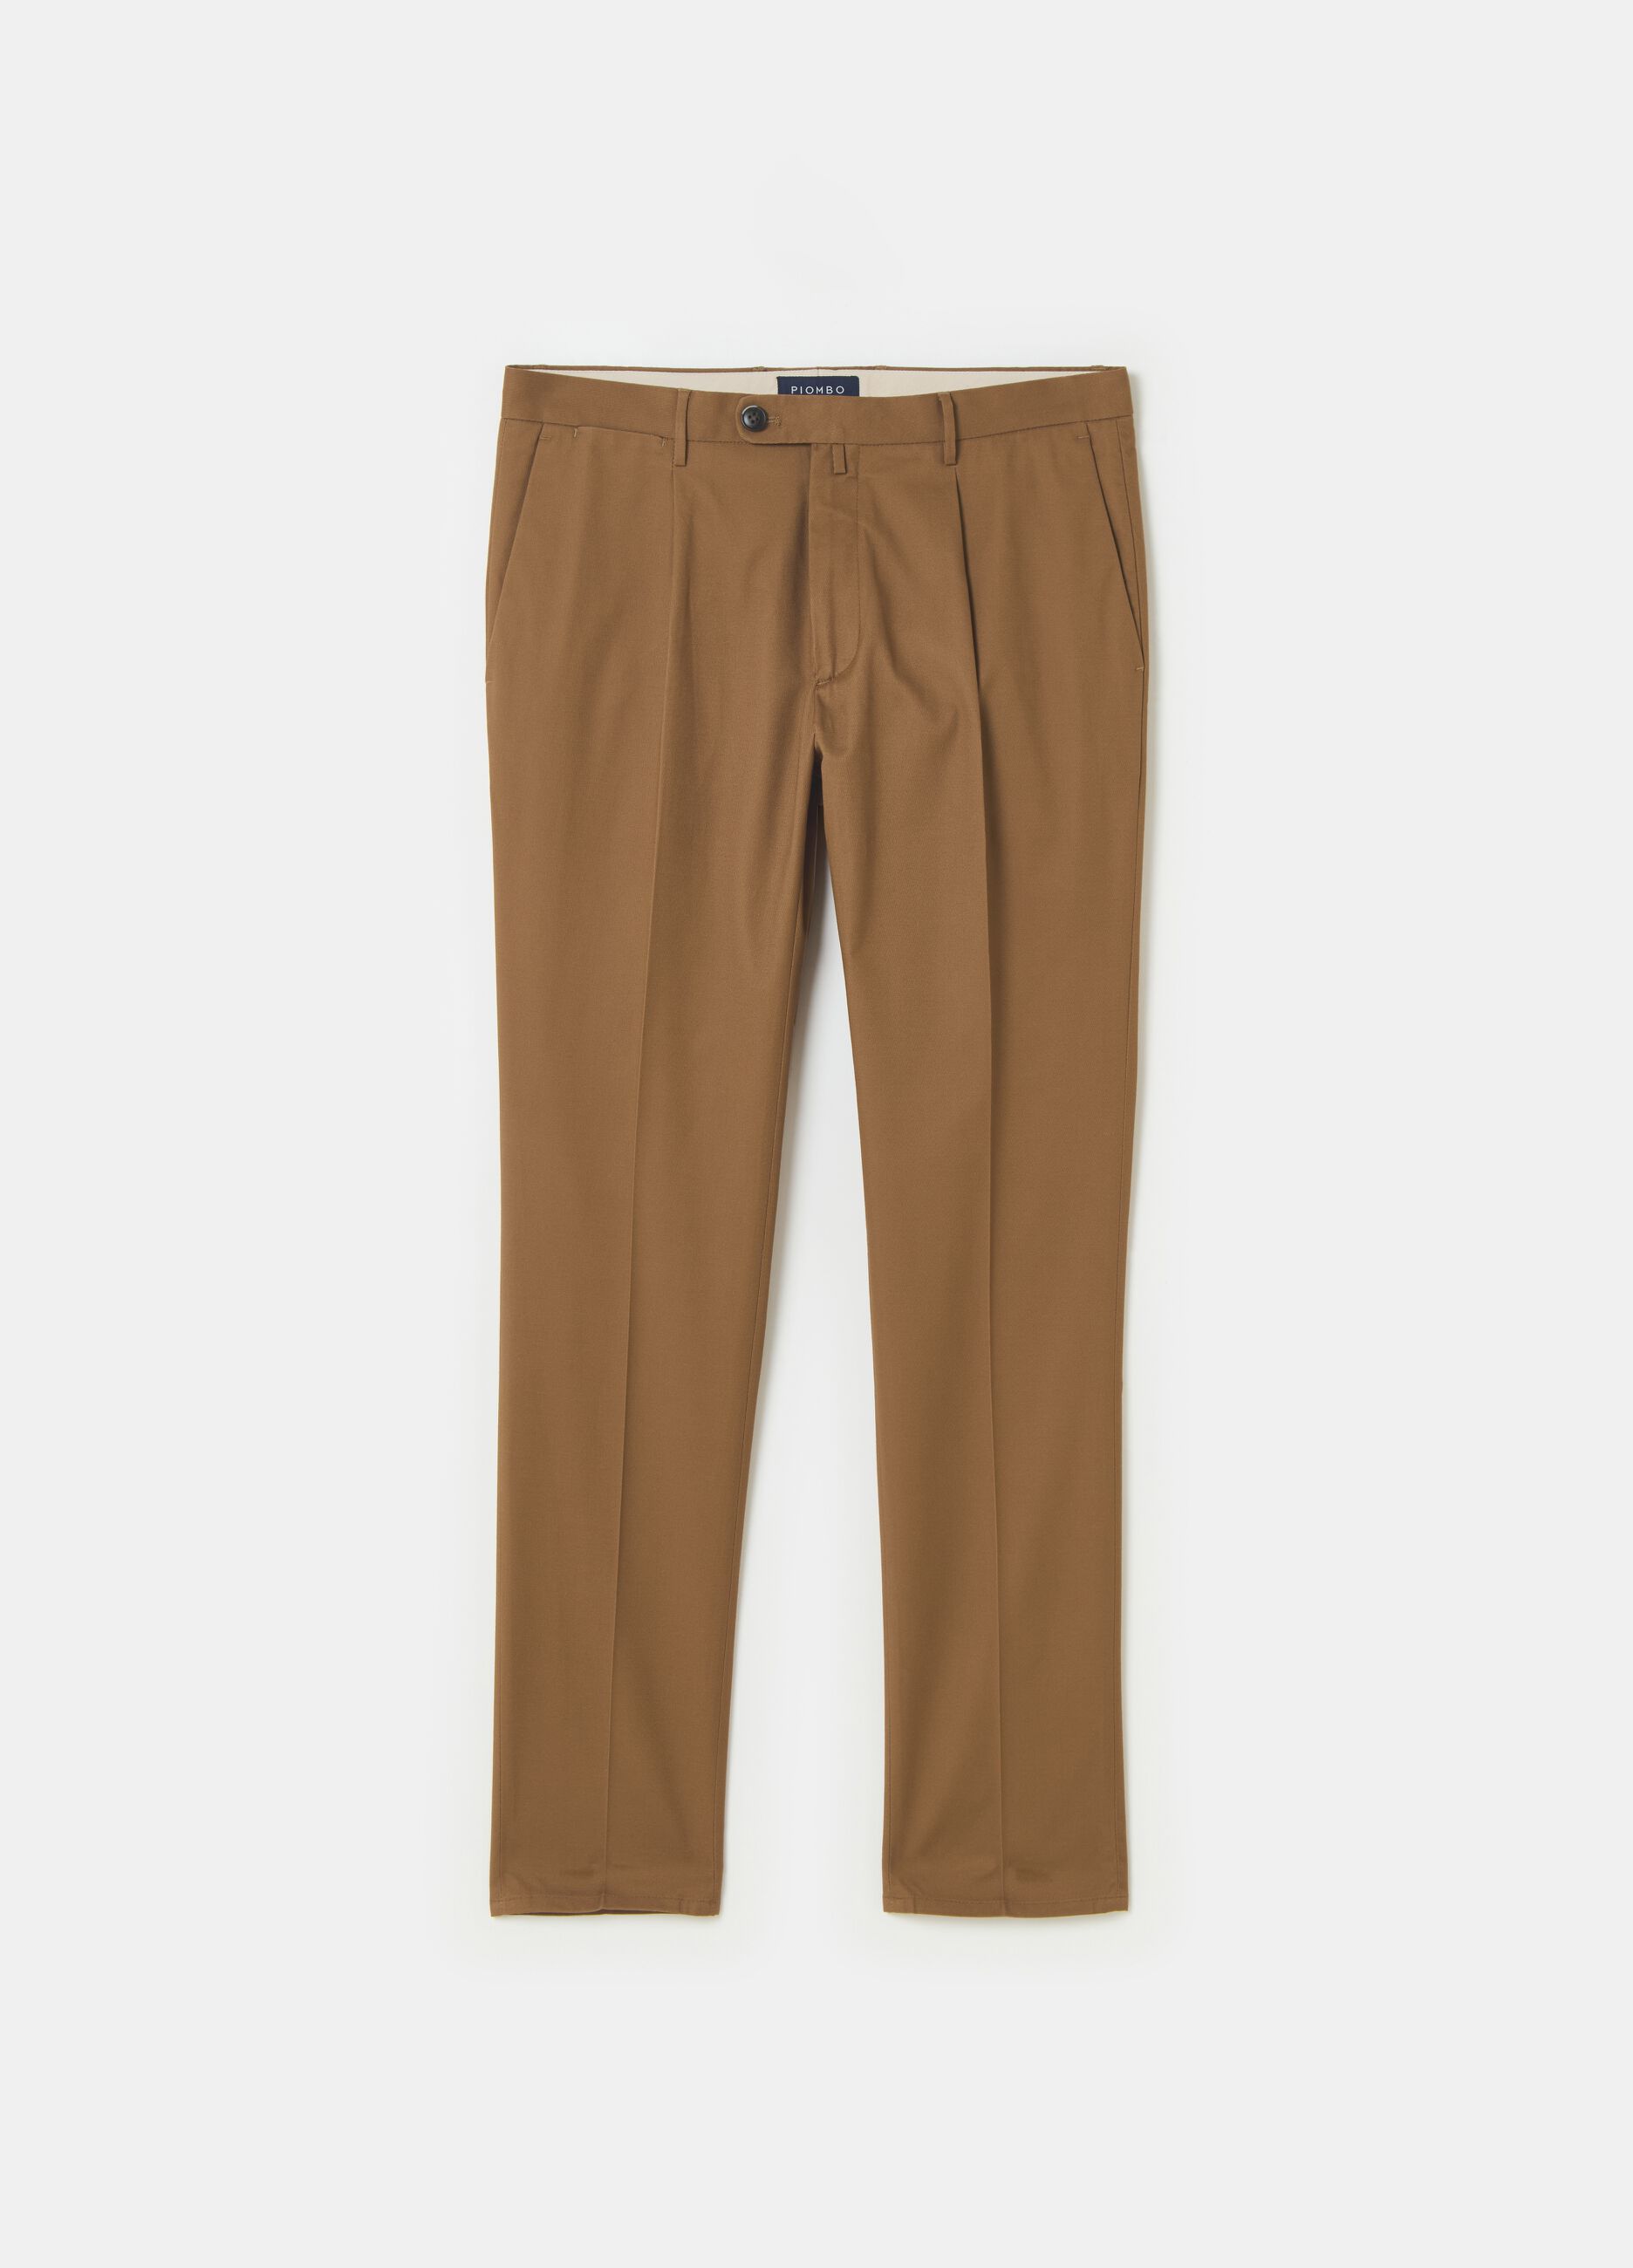 Contemporary chino trousers with darts